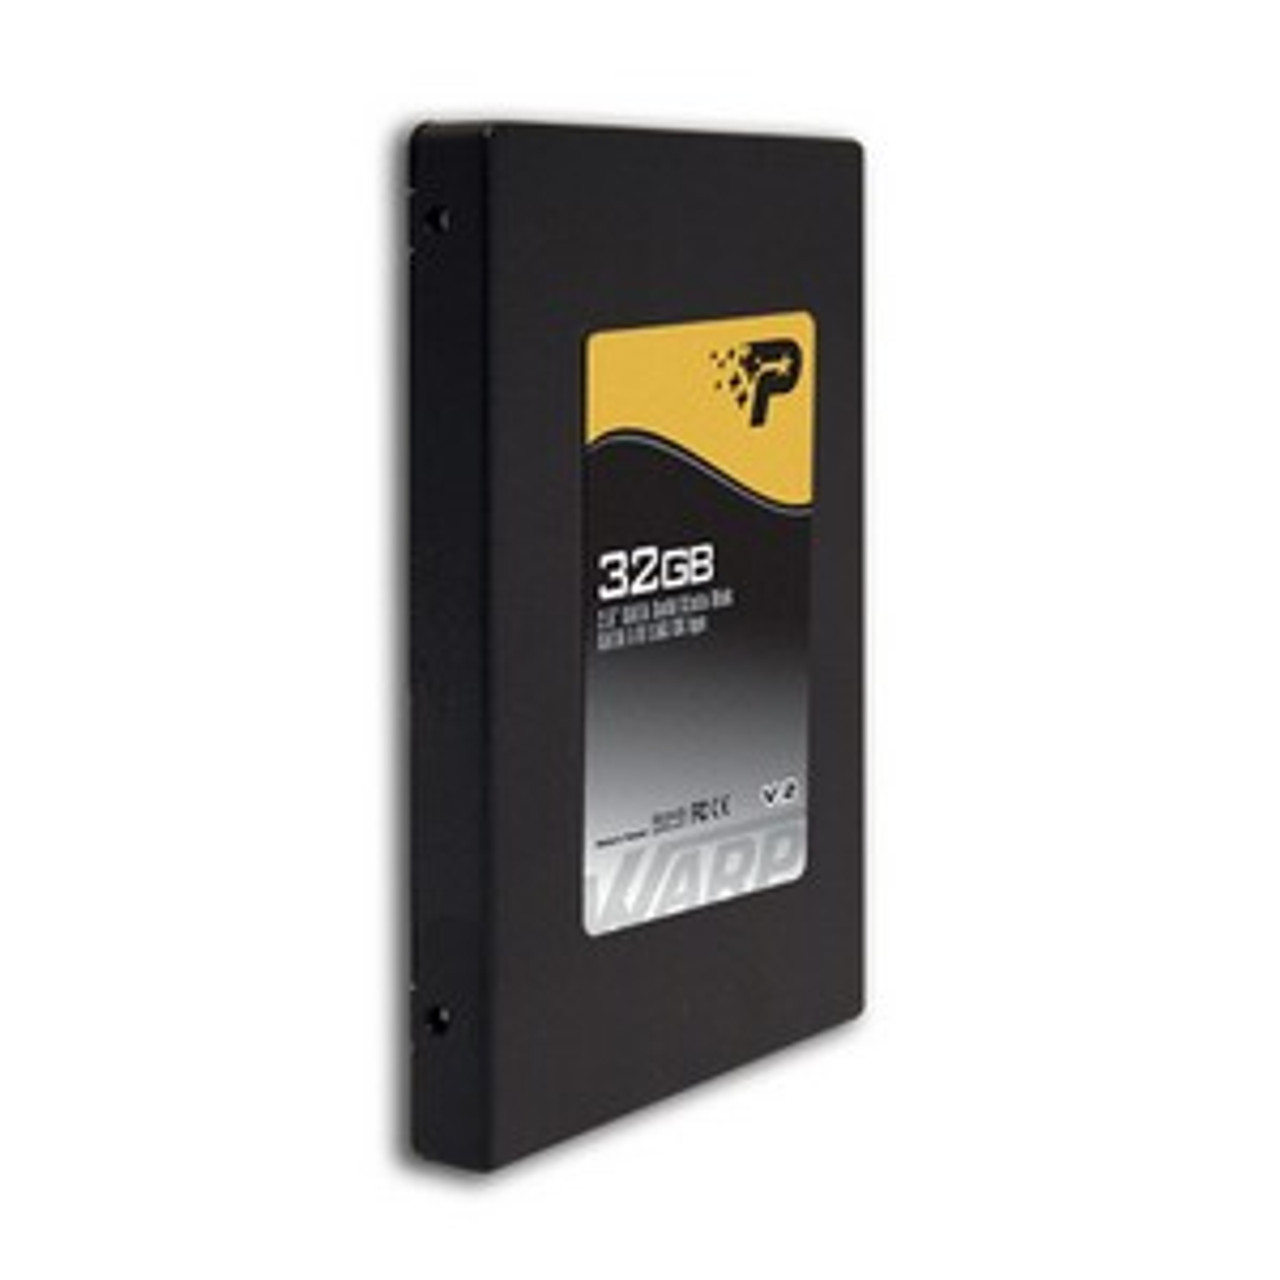 Part No:PE32GS25SSDR - Patriot Memory Warp PE32GS25SSDR 32 GB Internal Solid State Drive -  Pack - 2.5 - SATA/300 - Hot Swappable